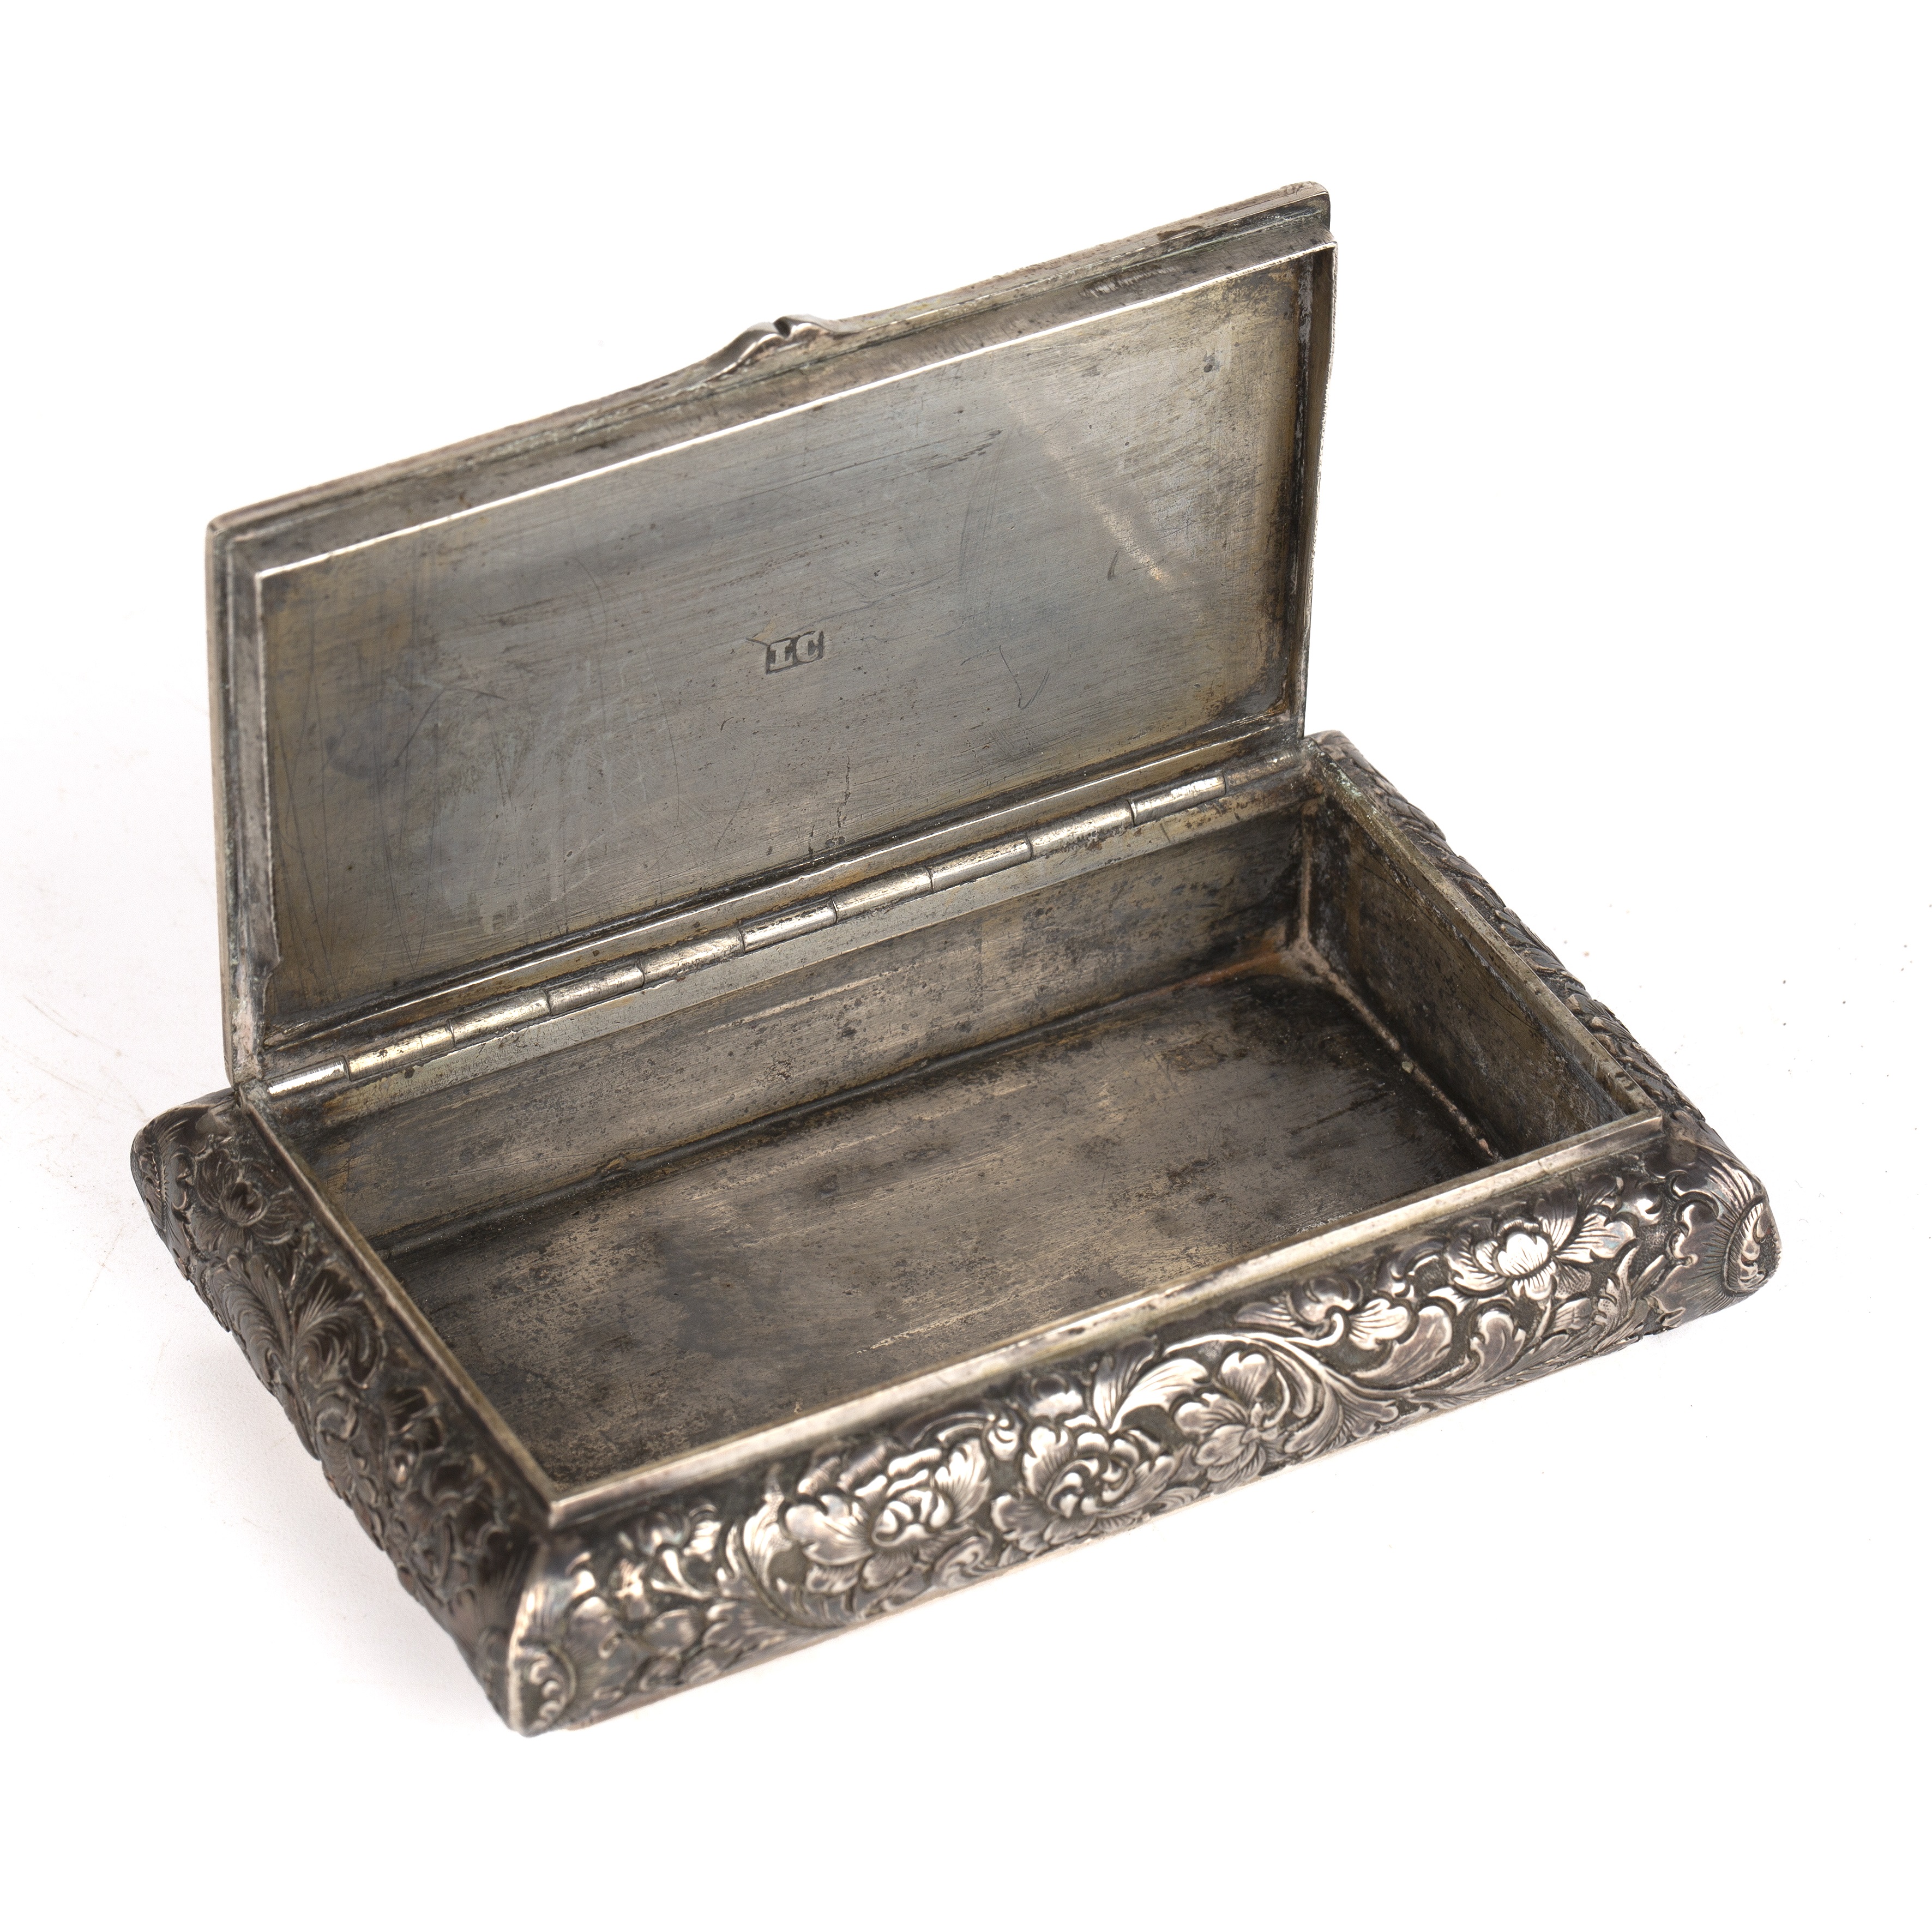 A 19th century silver plated snuff box with chinoiserie embossed decoration, makers mark IC, 10cm - Image 3 of 5